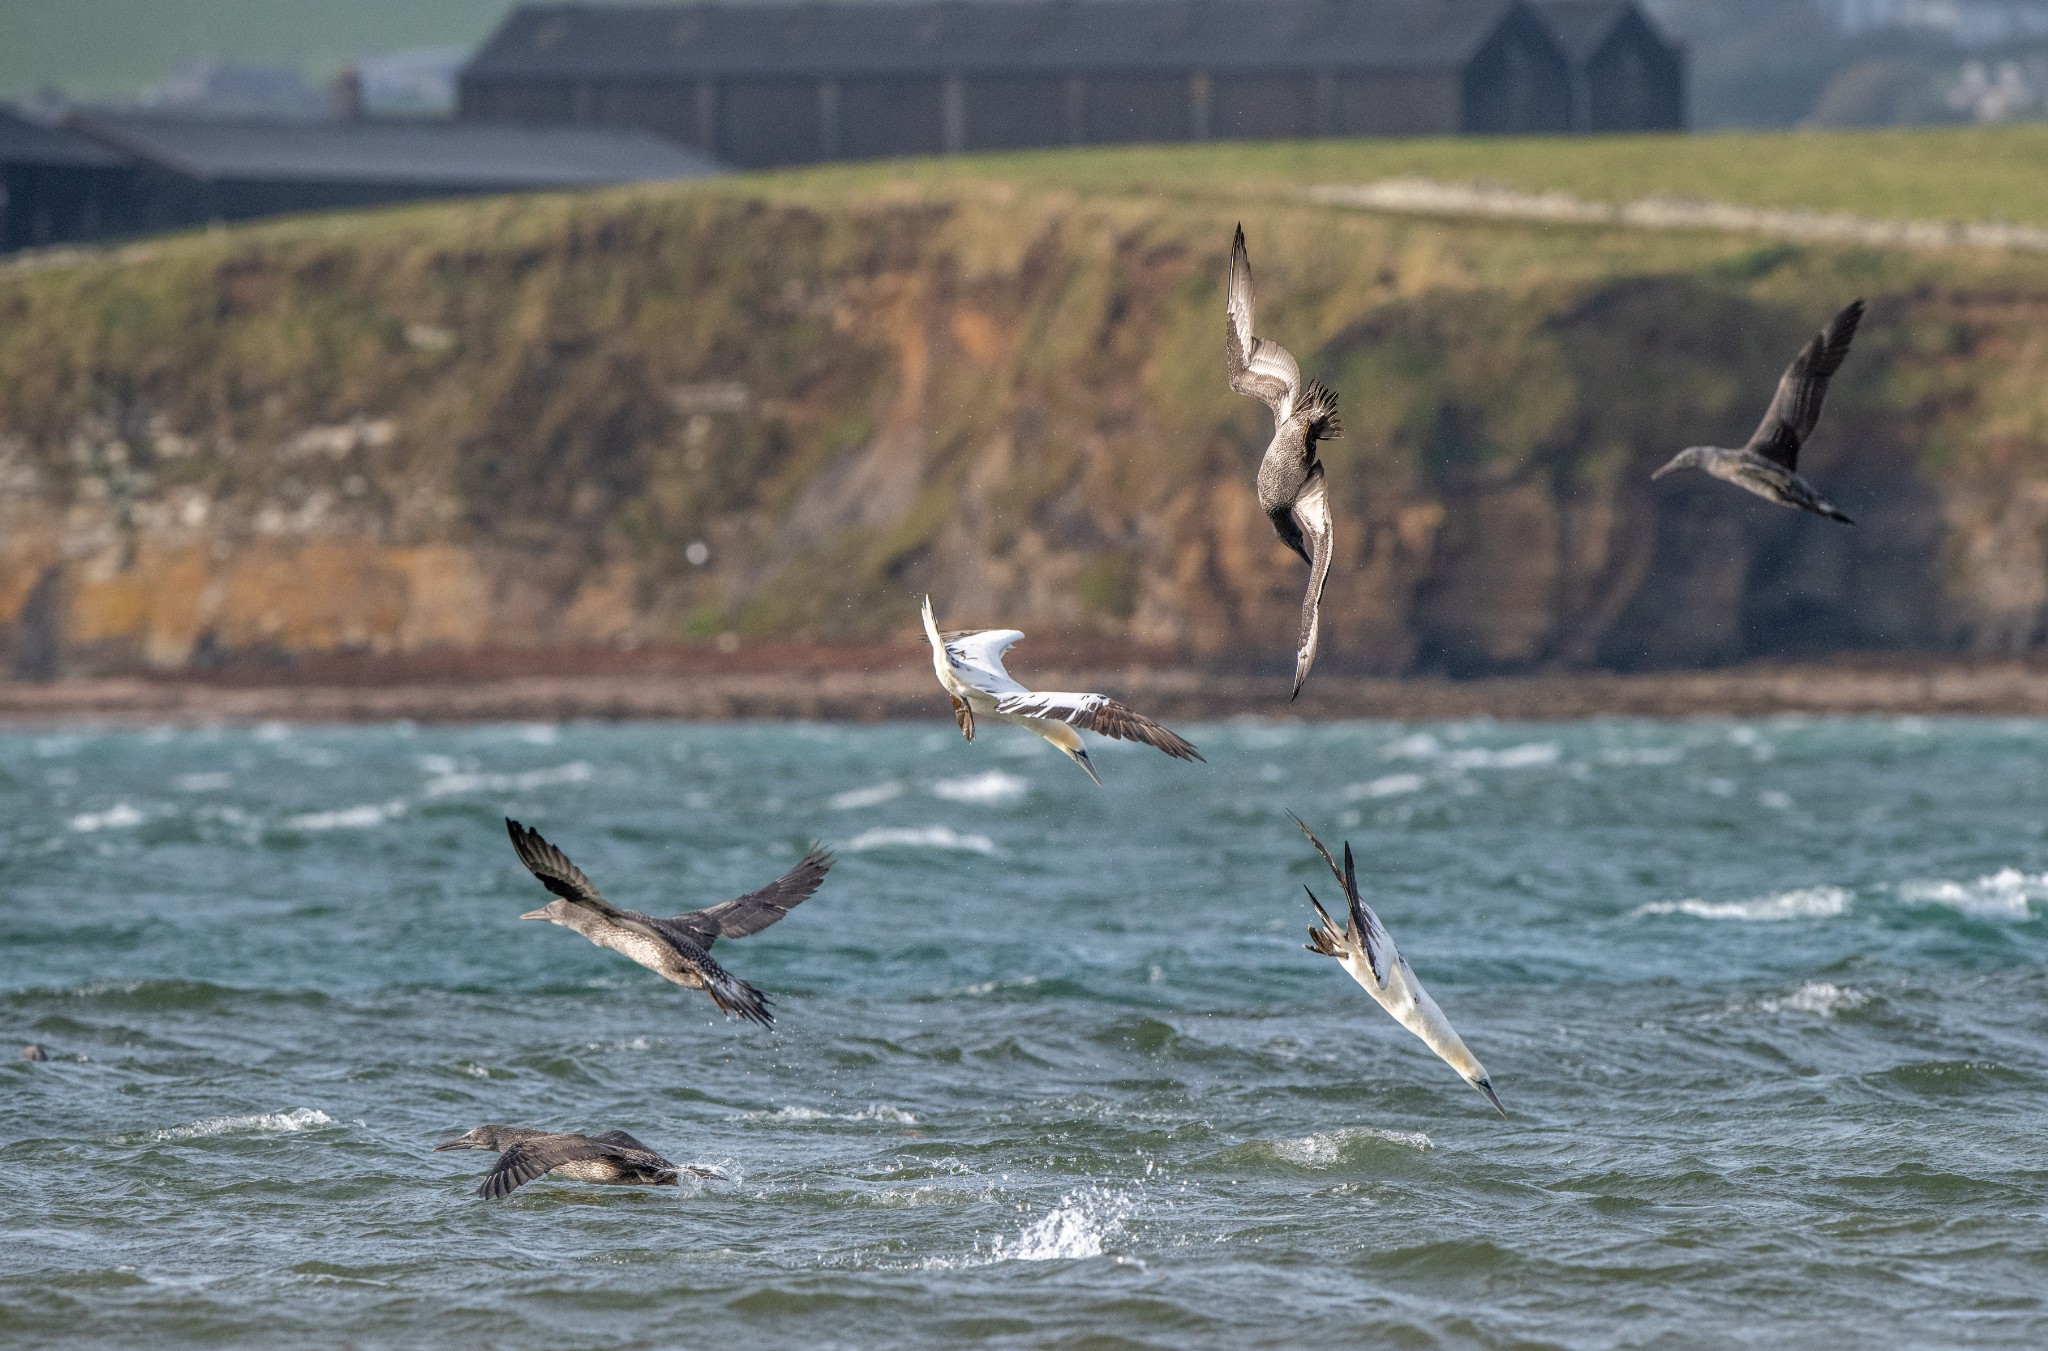 Gannets at Scapa, Orkney - image by Raymond Besant